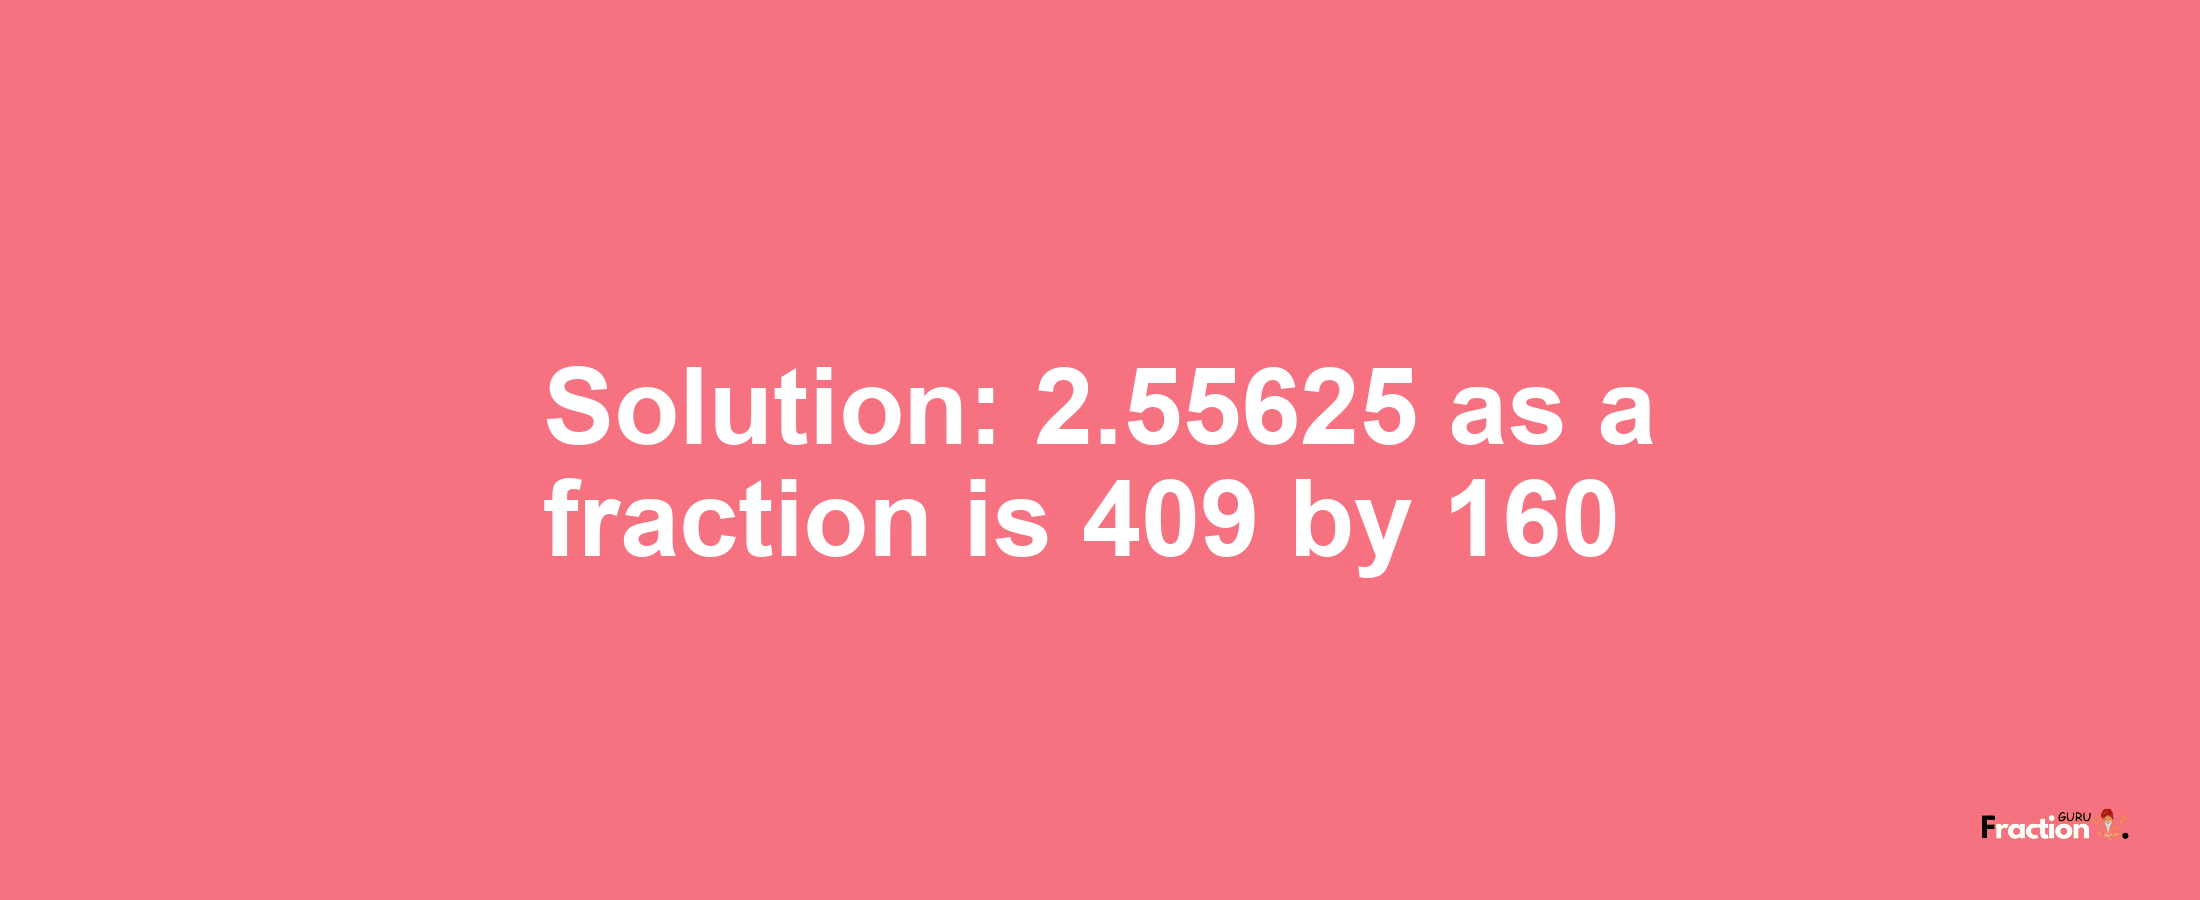 Solution:2.55625 as a fraction is 409/160